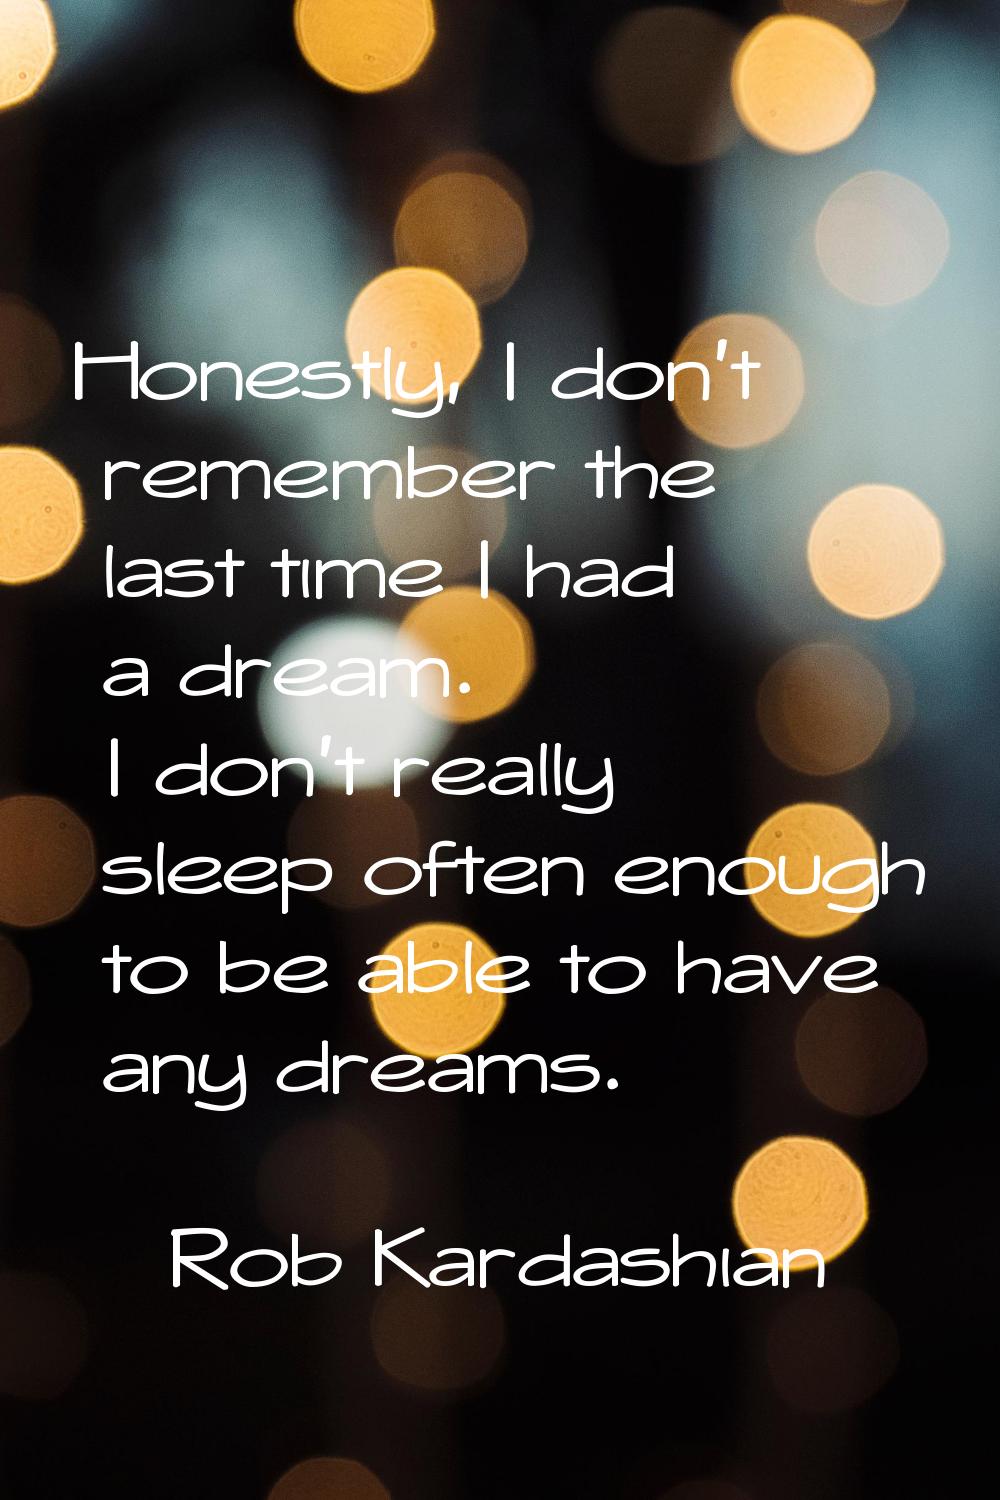 Honestly, I don't remember the last time I had a dream. I don't really sleep often enough to be abl